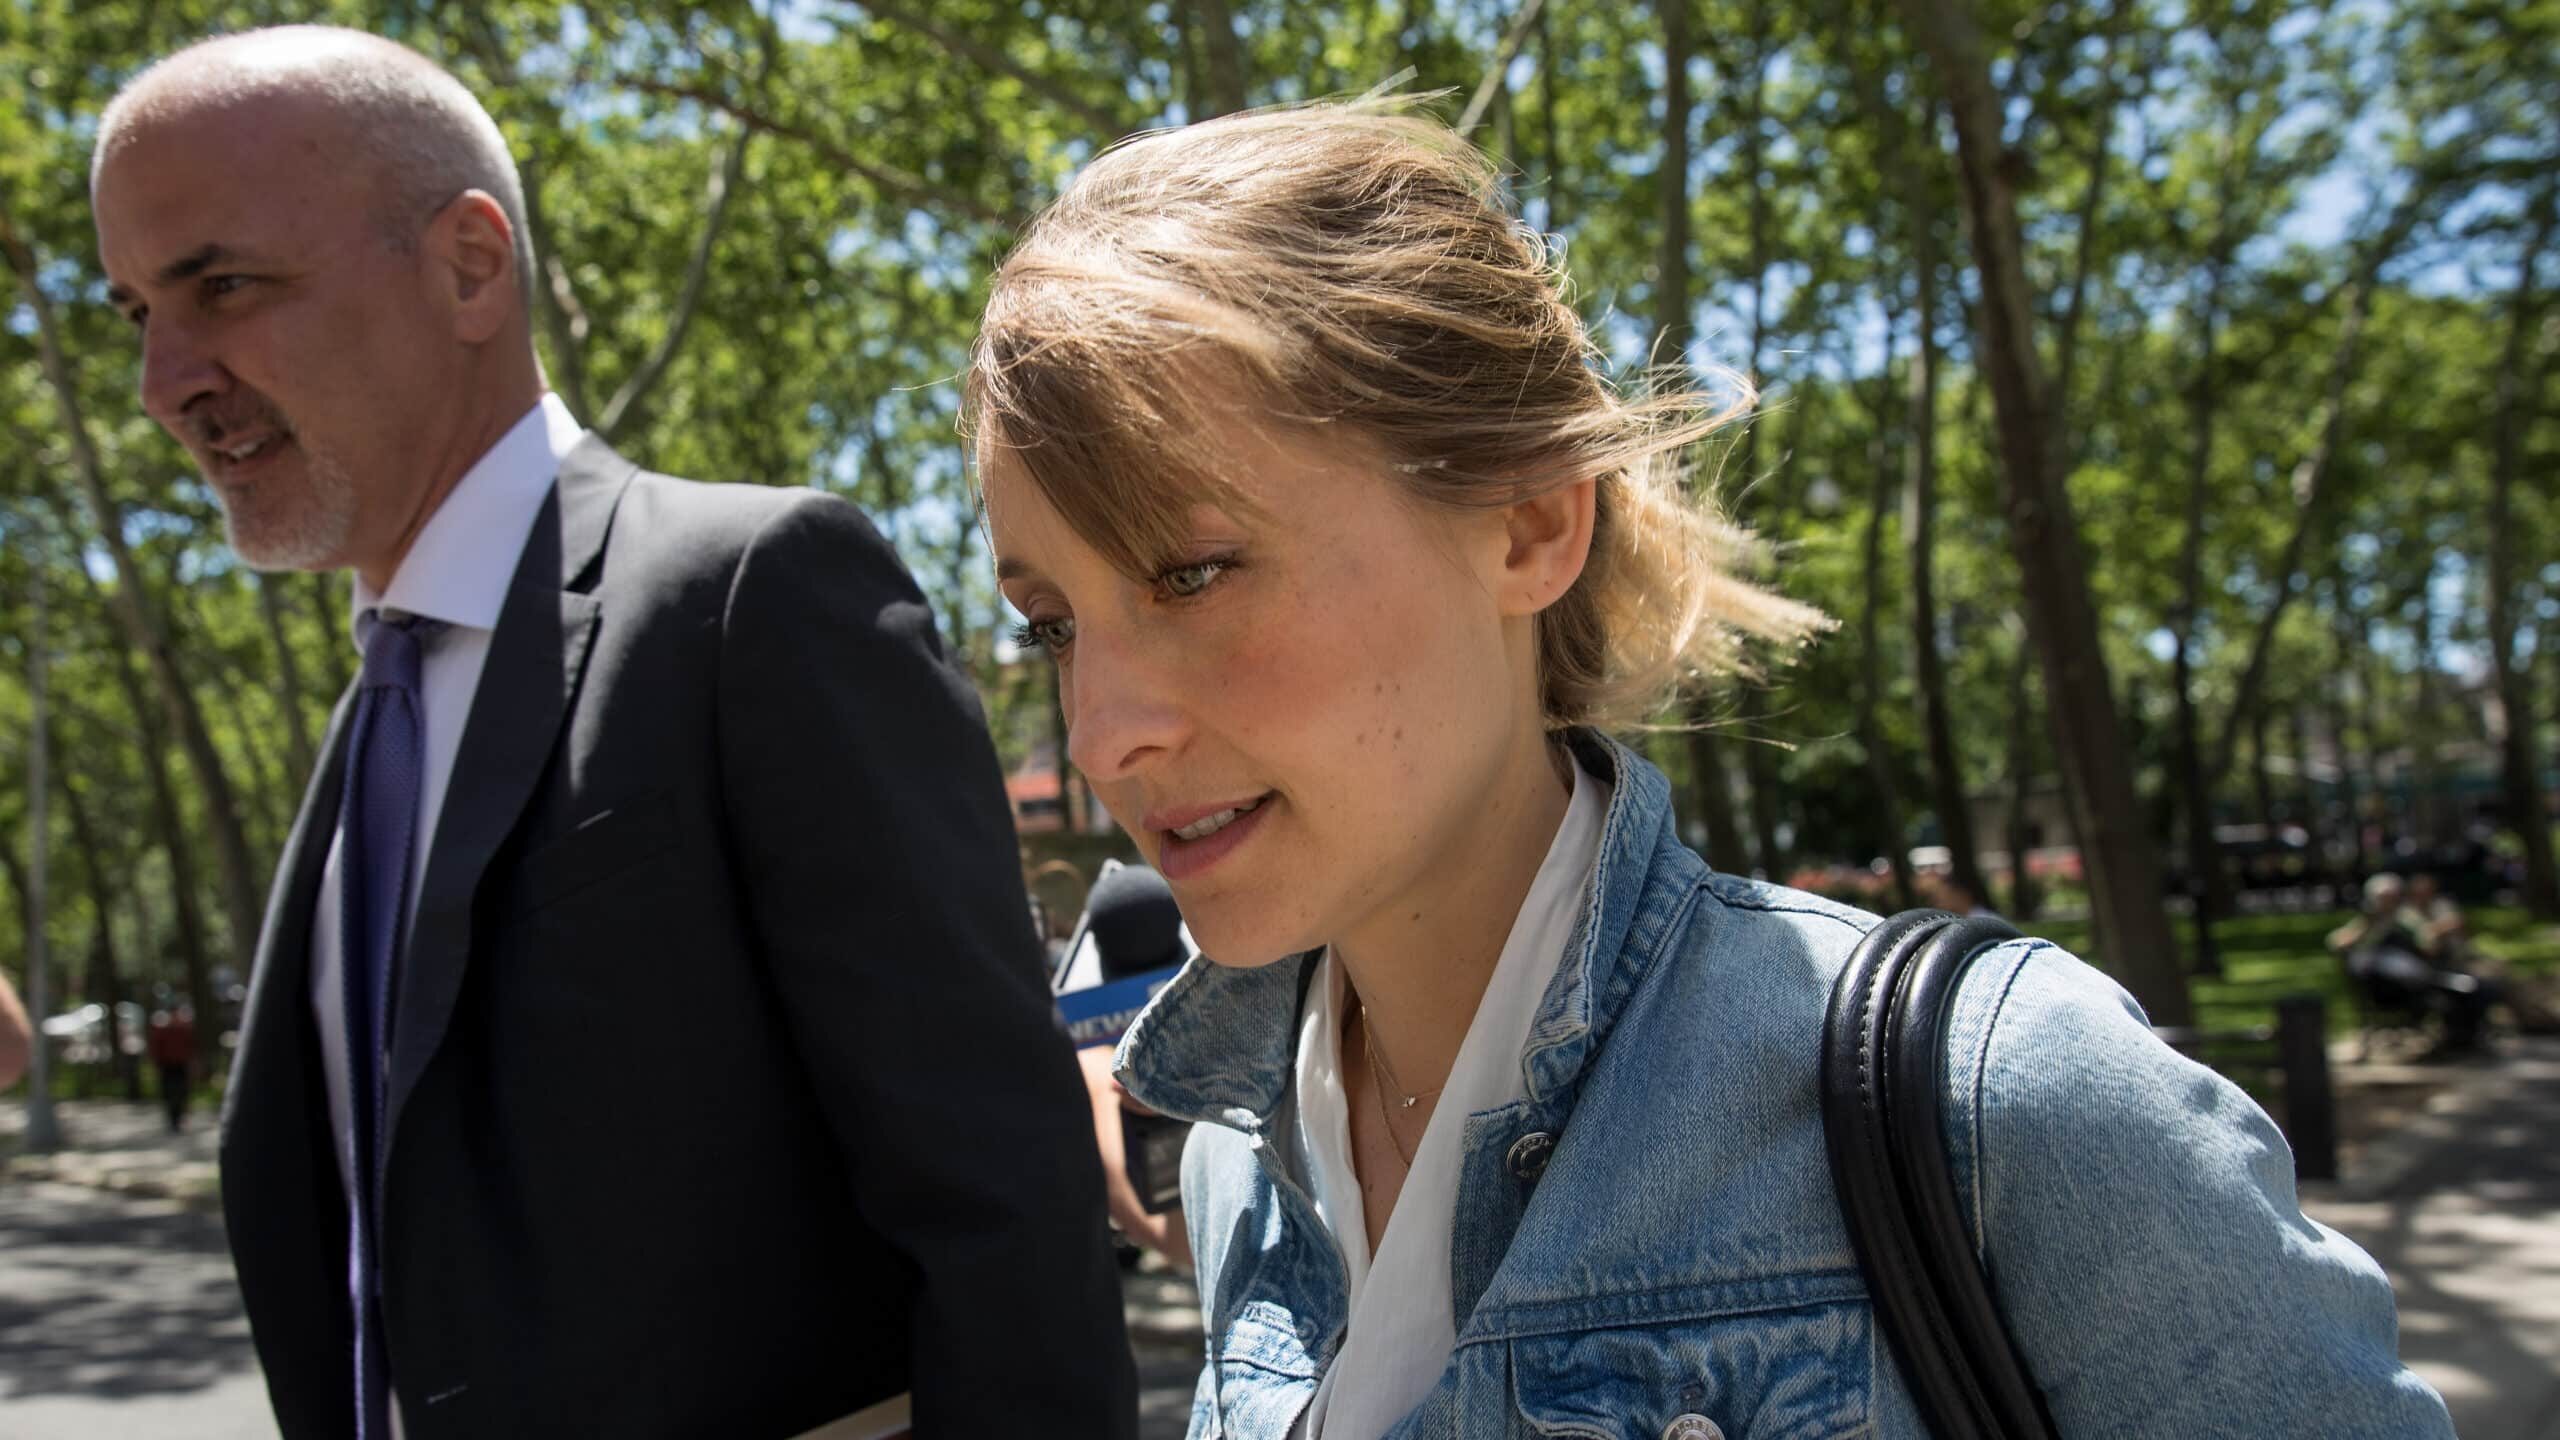 NEW YORK, NY - JUNE 12: Actress Allison Mack arrives at the U.S. District Court for the Eastern District of New York for a status conference, June 12, 2018 in the Brooklyn borough of New York City. Mack was charged in April with sex trafficking for her involvement with a self-help organization for women that forced members into sexual acts with their leader. The group, called Nxivm, was led by founder Keith Raniere, who was arrested in March on sex-trafficking charges. 